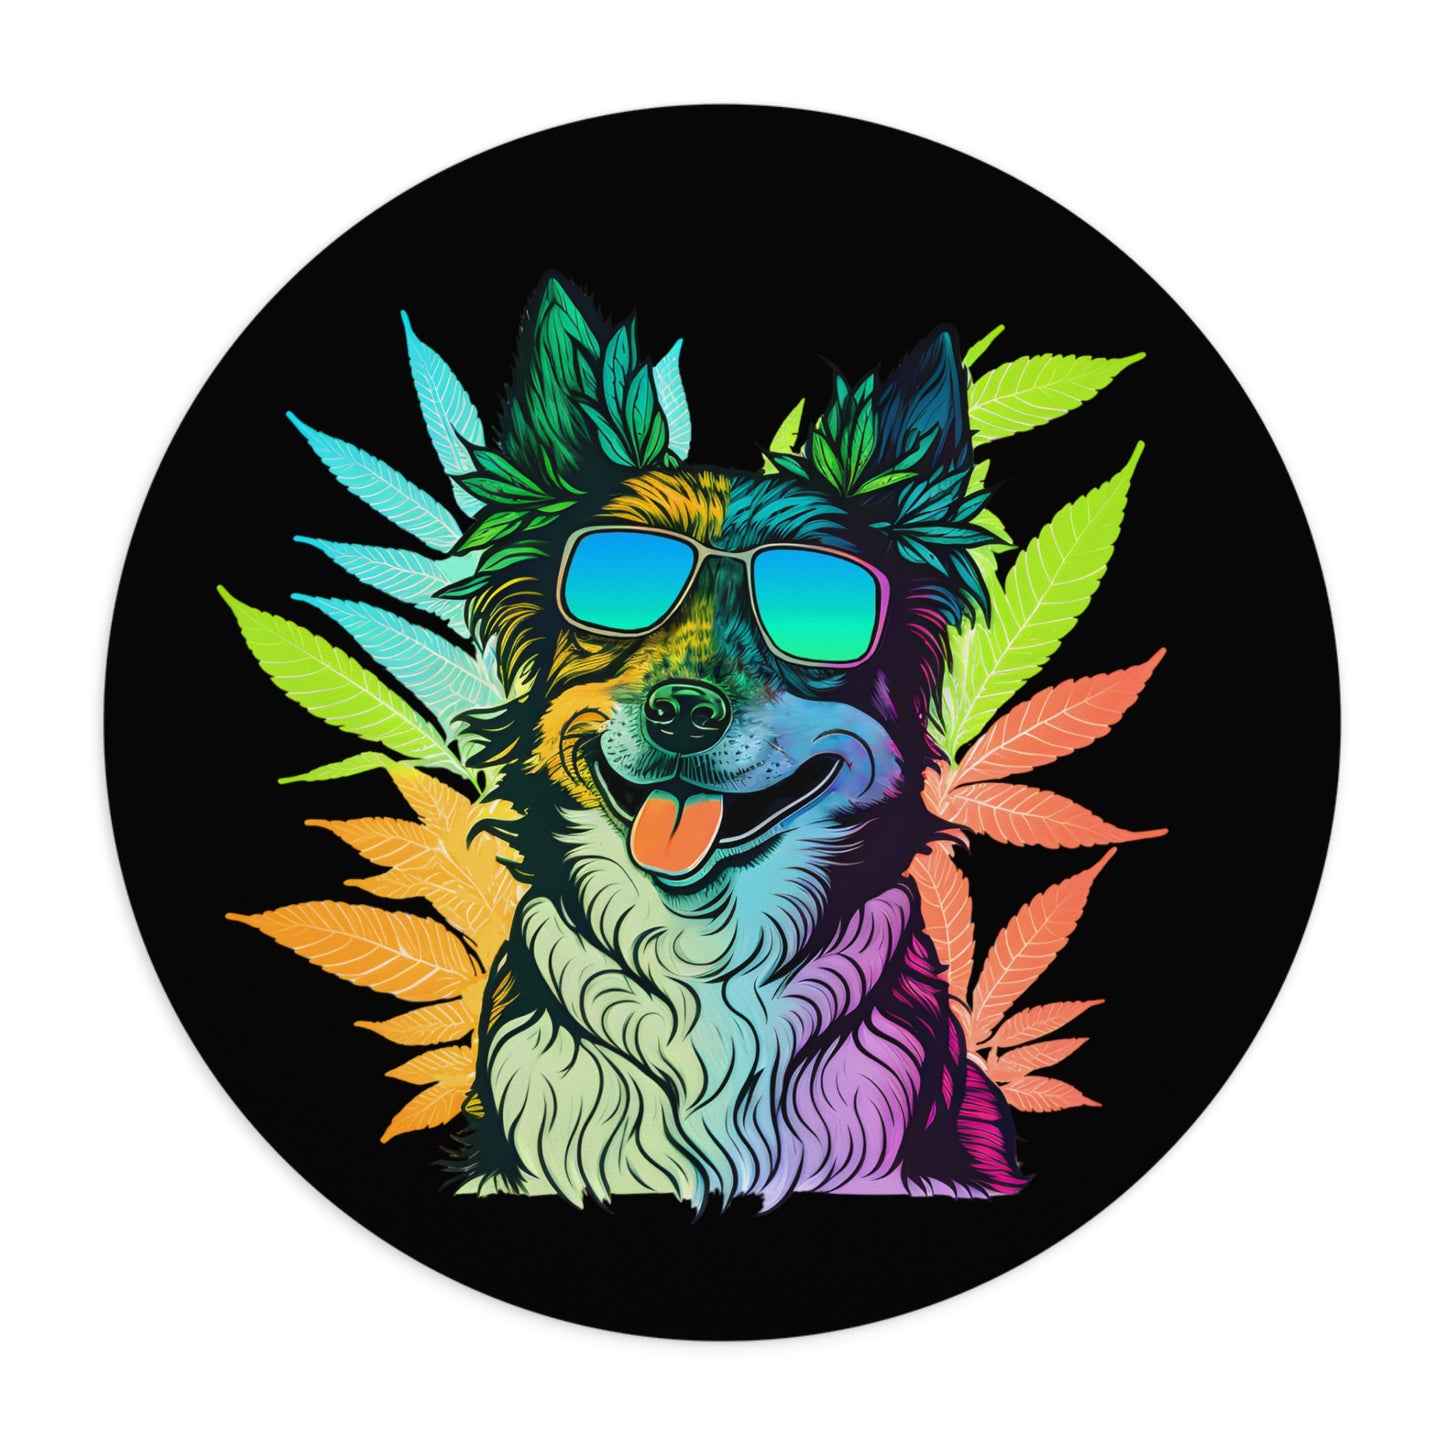 An awesome round Cannabis Border Collie Mouse Pad